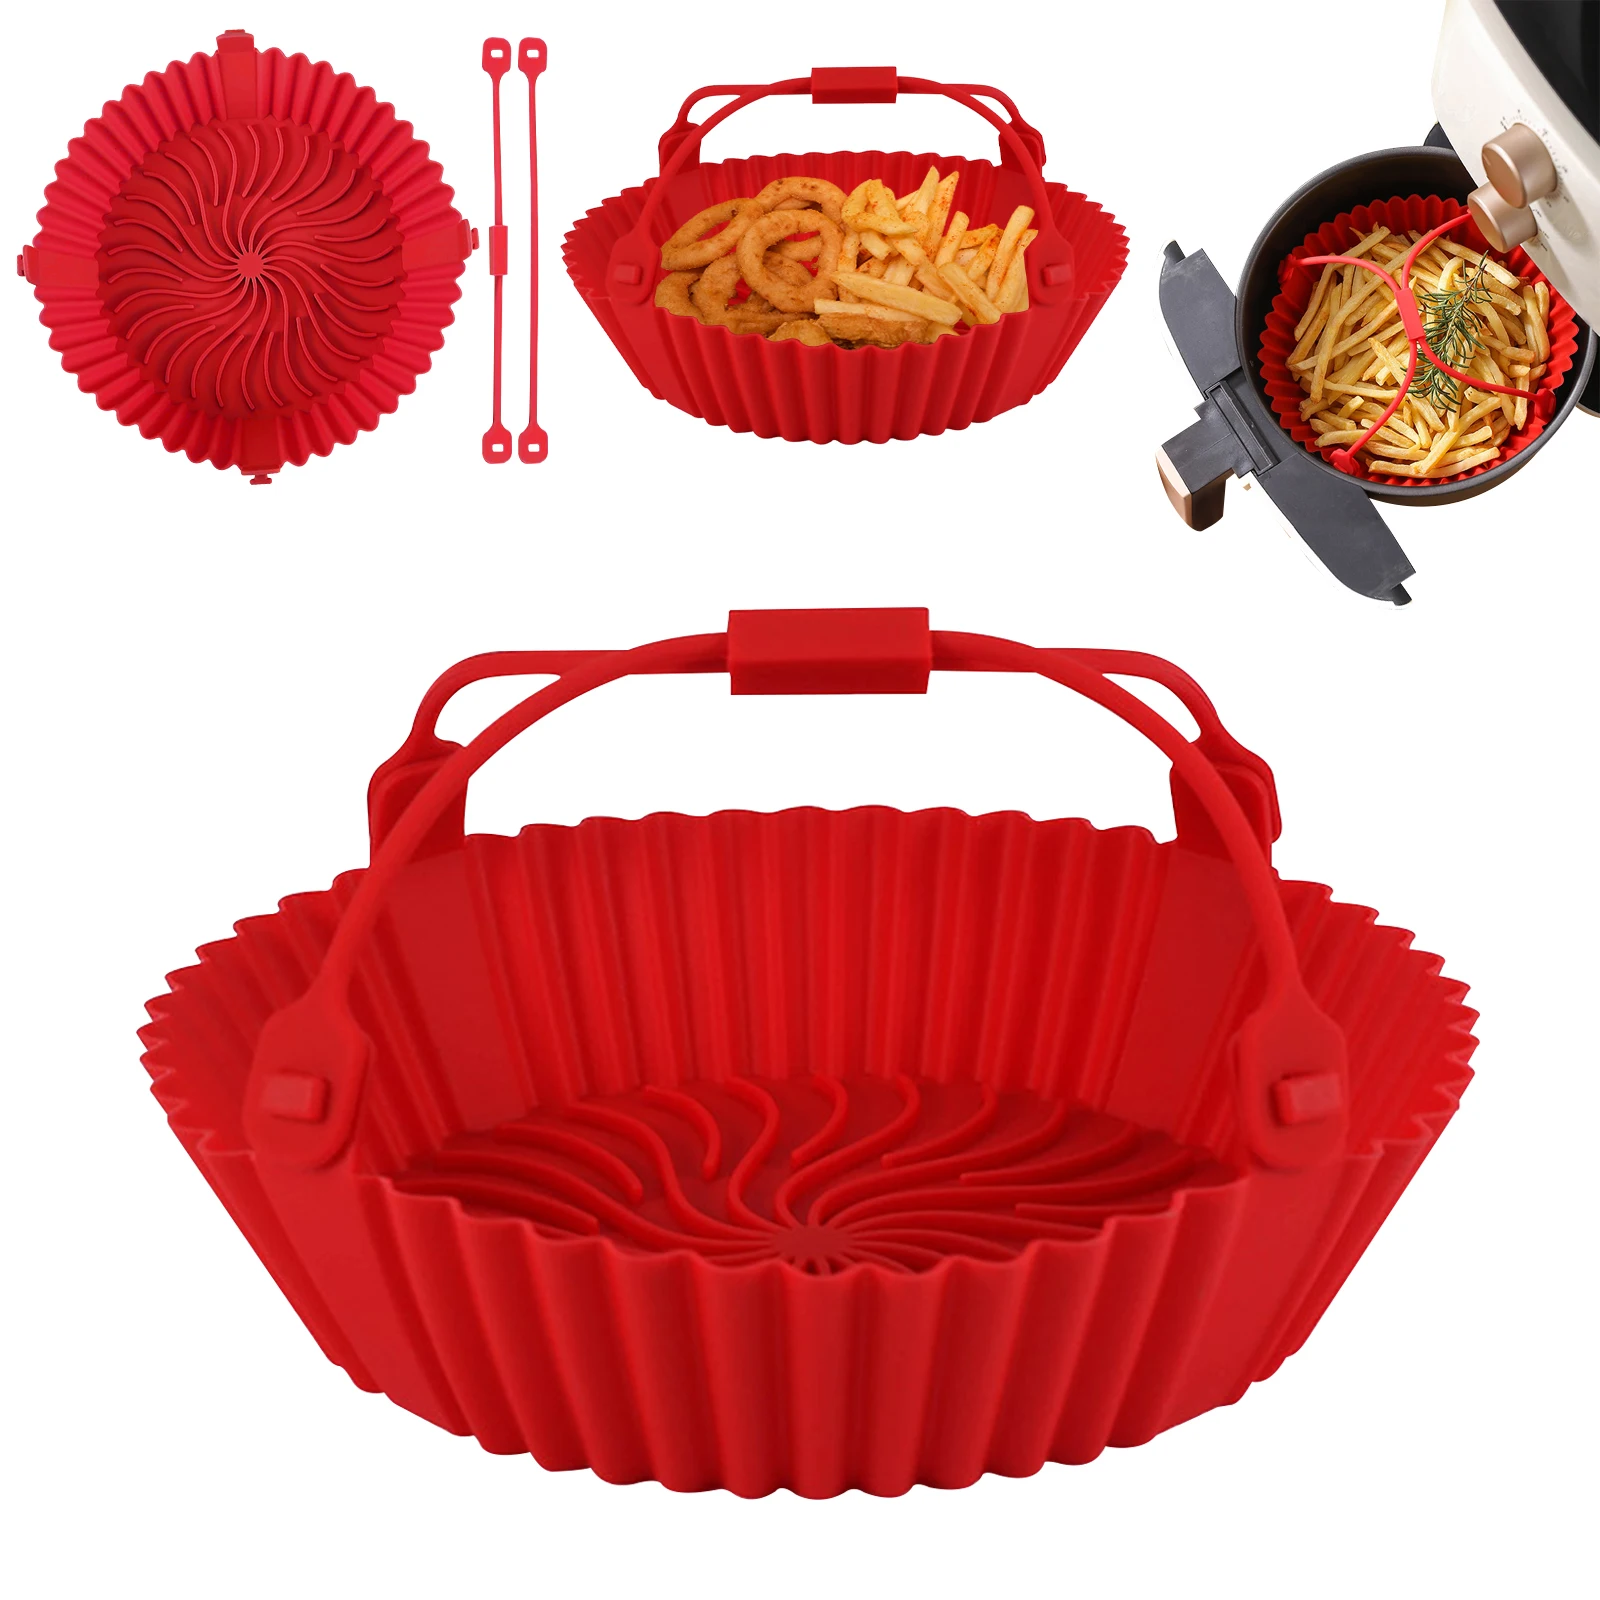 https://ae01.alicdn.com/kf/S0a7d0c19e47343e6a6d3060dea0484feh/Silicone-Basket-Pot-Tray-Airfryer-Liner-For-Air-Fryer-Pan-Baking-Mold-Canister-Shape-Protector-Reusable.jpg